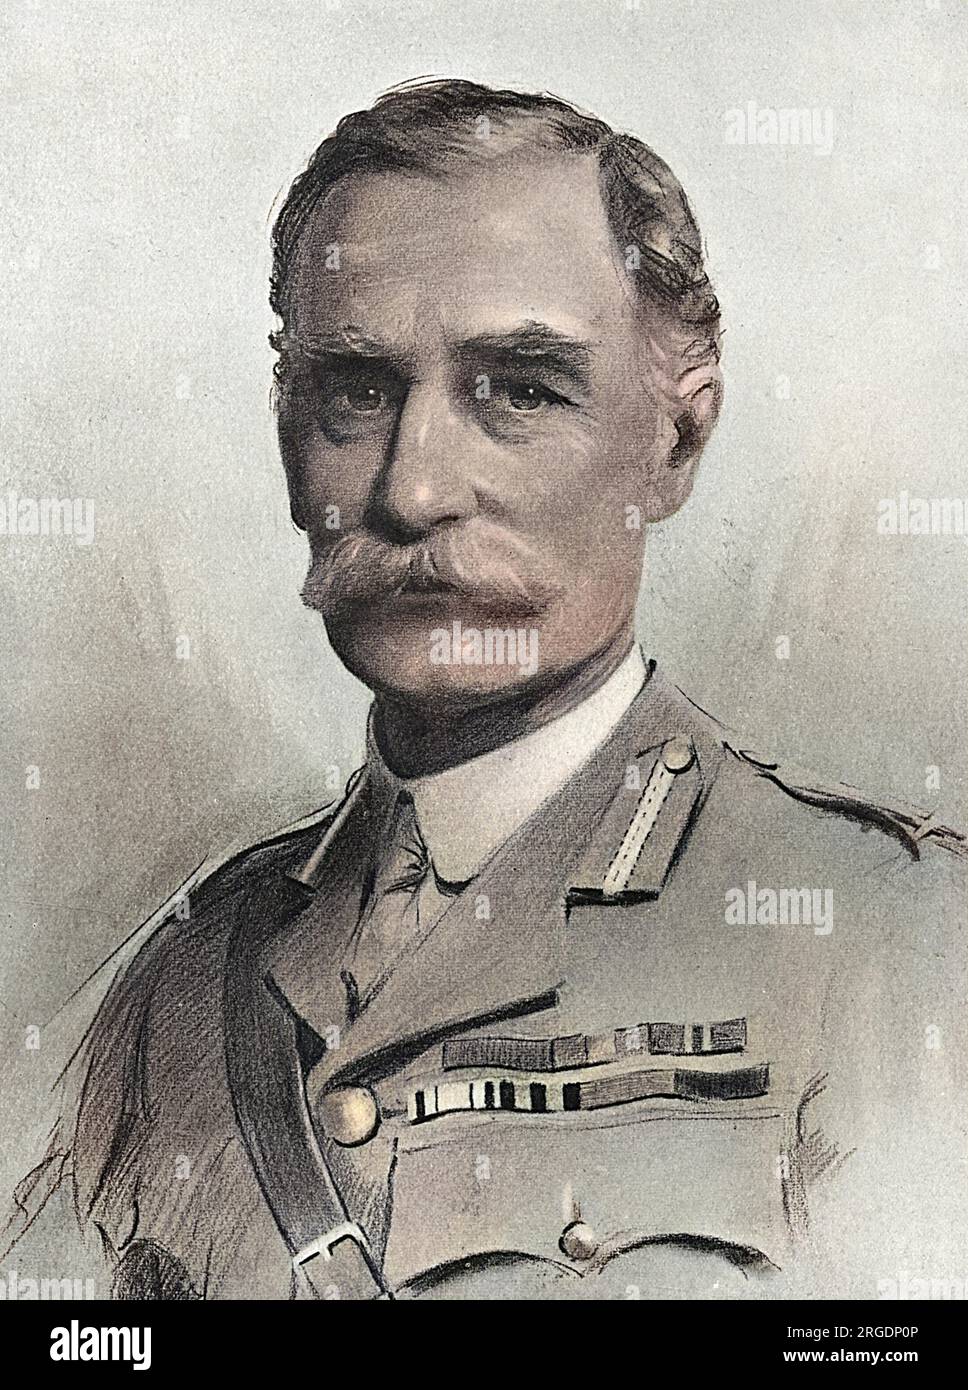 Major-General Sir John Steevens, KCB, KCMG (1855-1925), British Army Director of Equipment and Ordnance Stores during the First World War.  He war service dated back to the Zulu War of 1879 and the Egyptian Campaign of 1882.  After just thirteen year's service he reached the rank of lieutenant-colonel and eleven years later became Principal Ordnance Officer at Woolwich, an appointment he held throughout the Boer War (1899-1902).  He held th appointment of Inspector-General of Ordnance Services, and subsequently Director of Artillery at the War Office from 1893-1898. Stock Photo